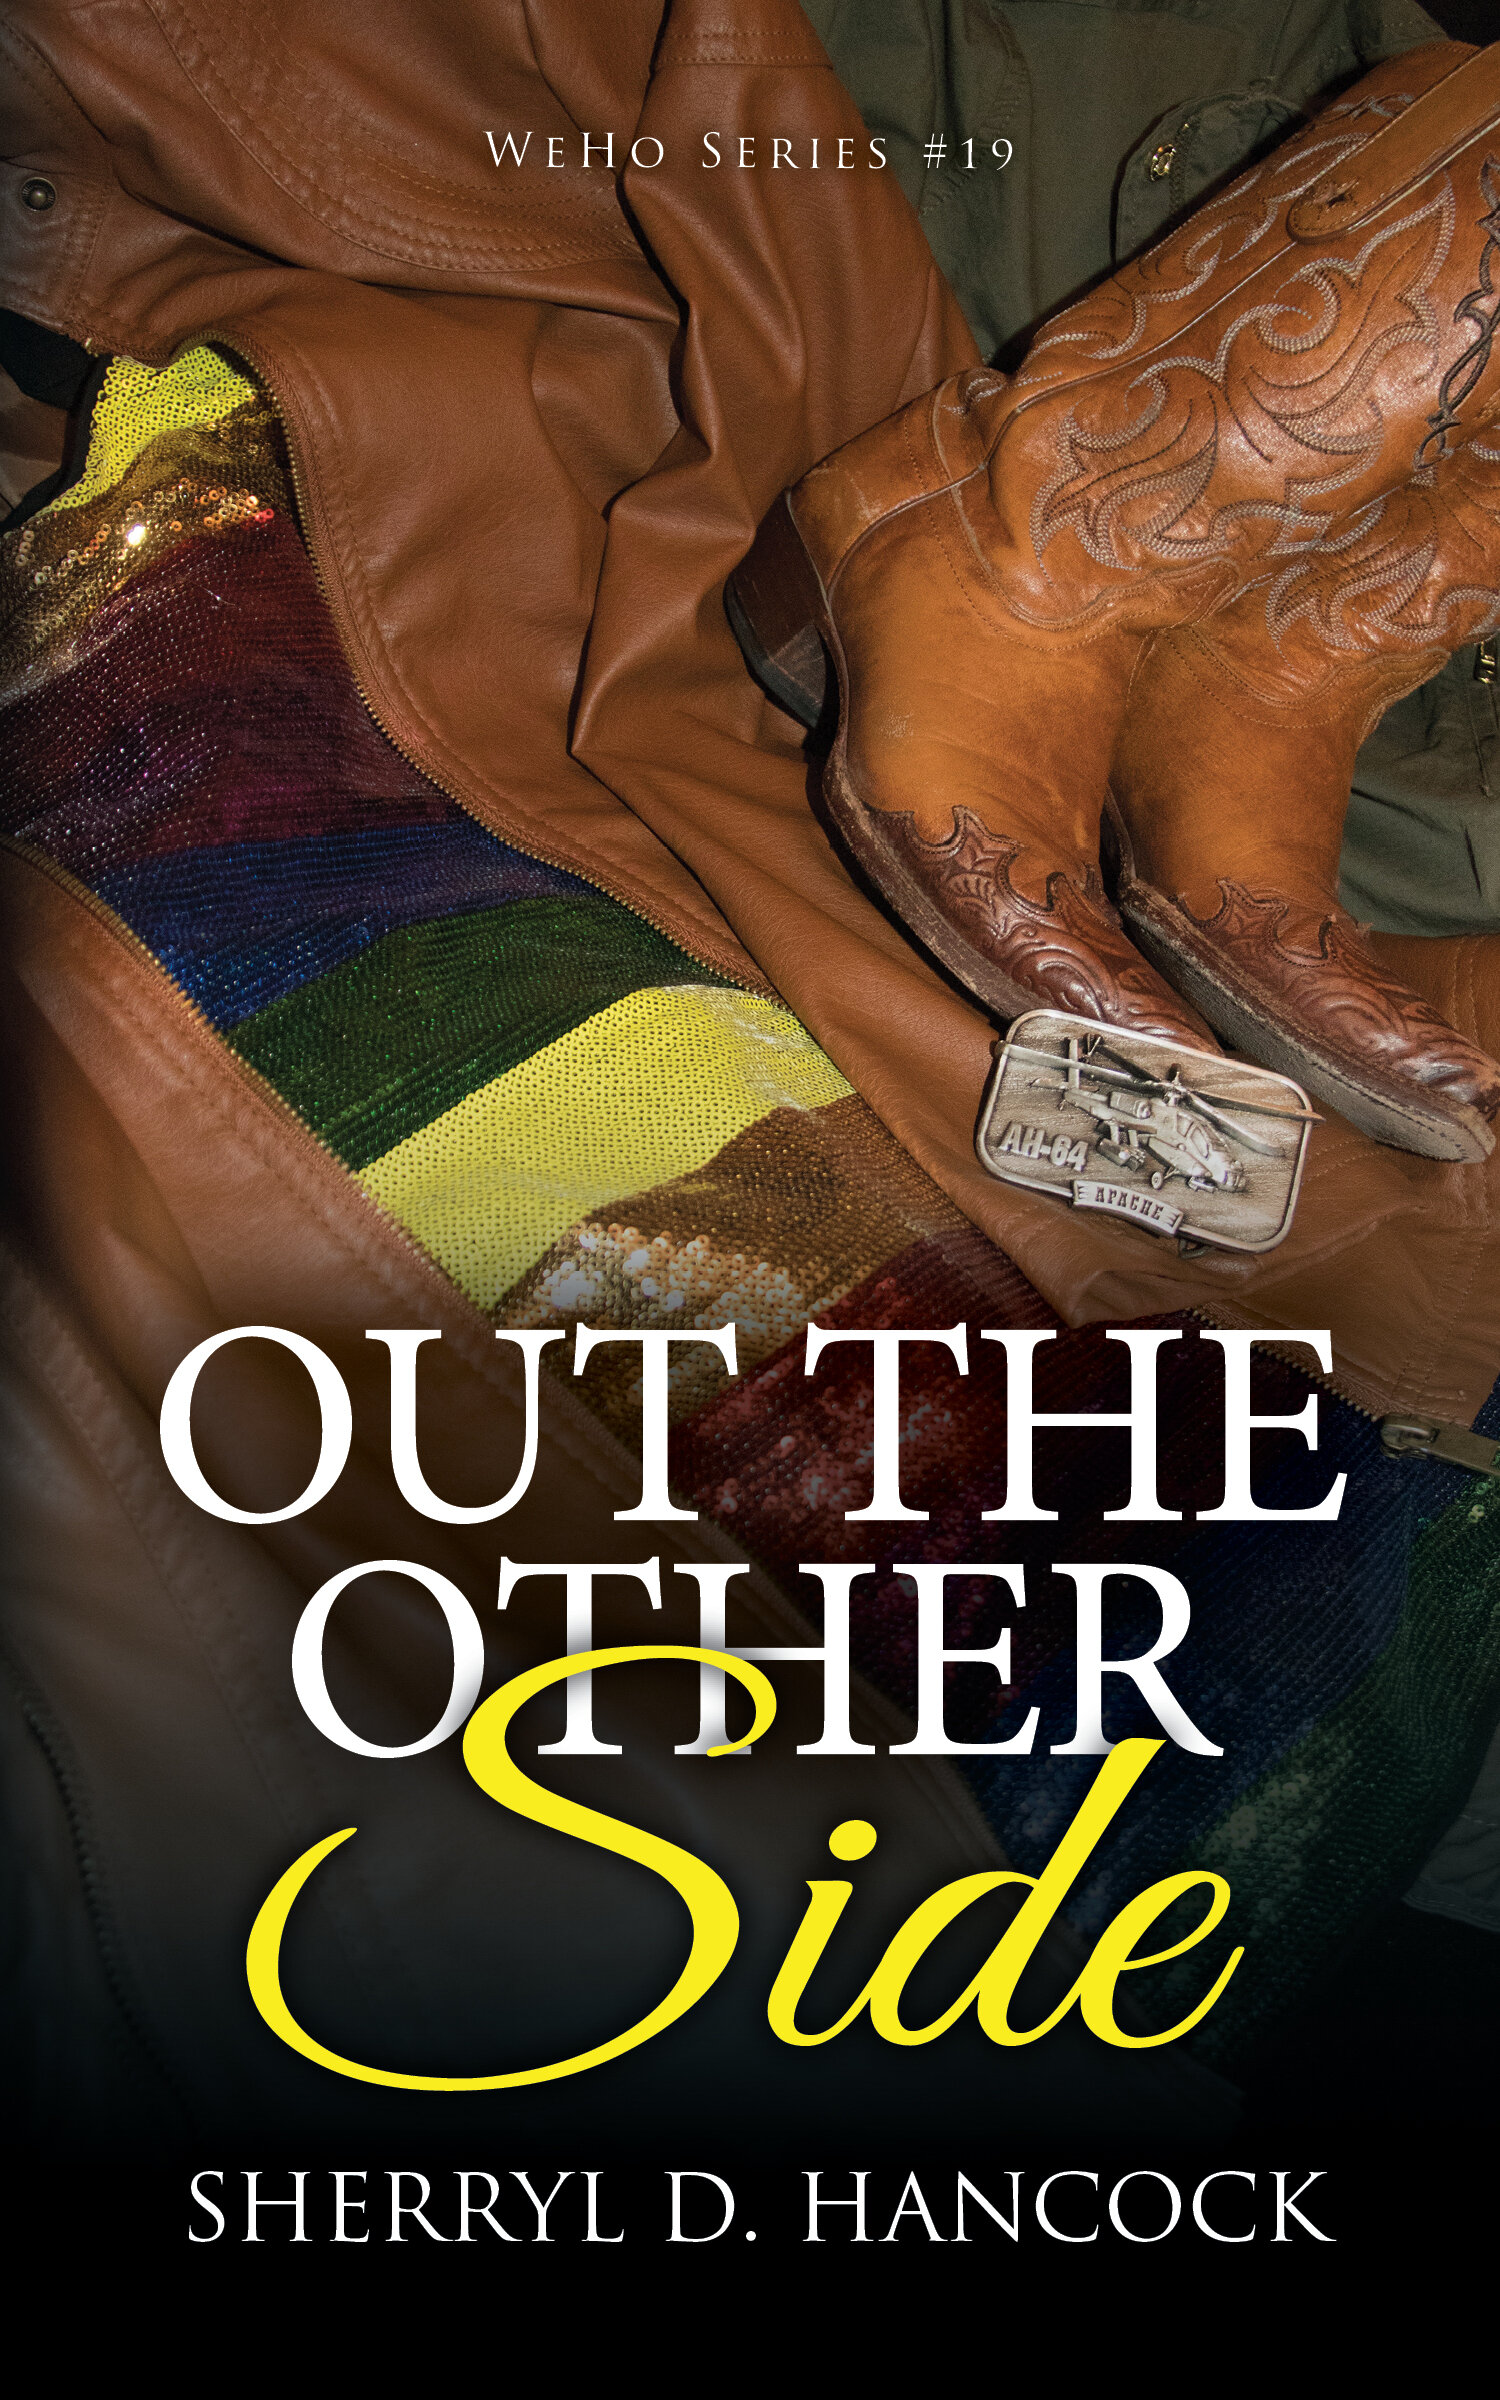 Out the other side - Ebook.jpg